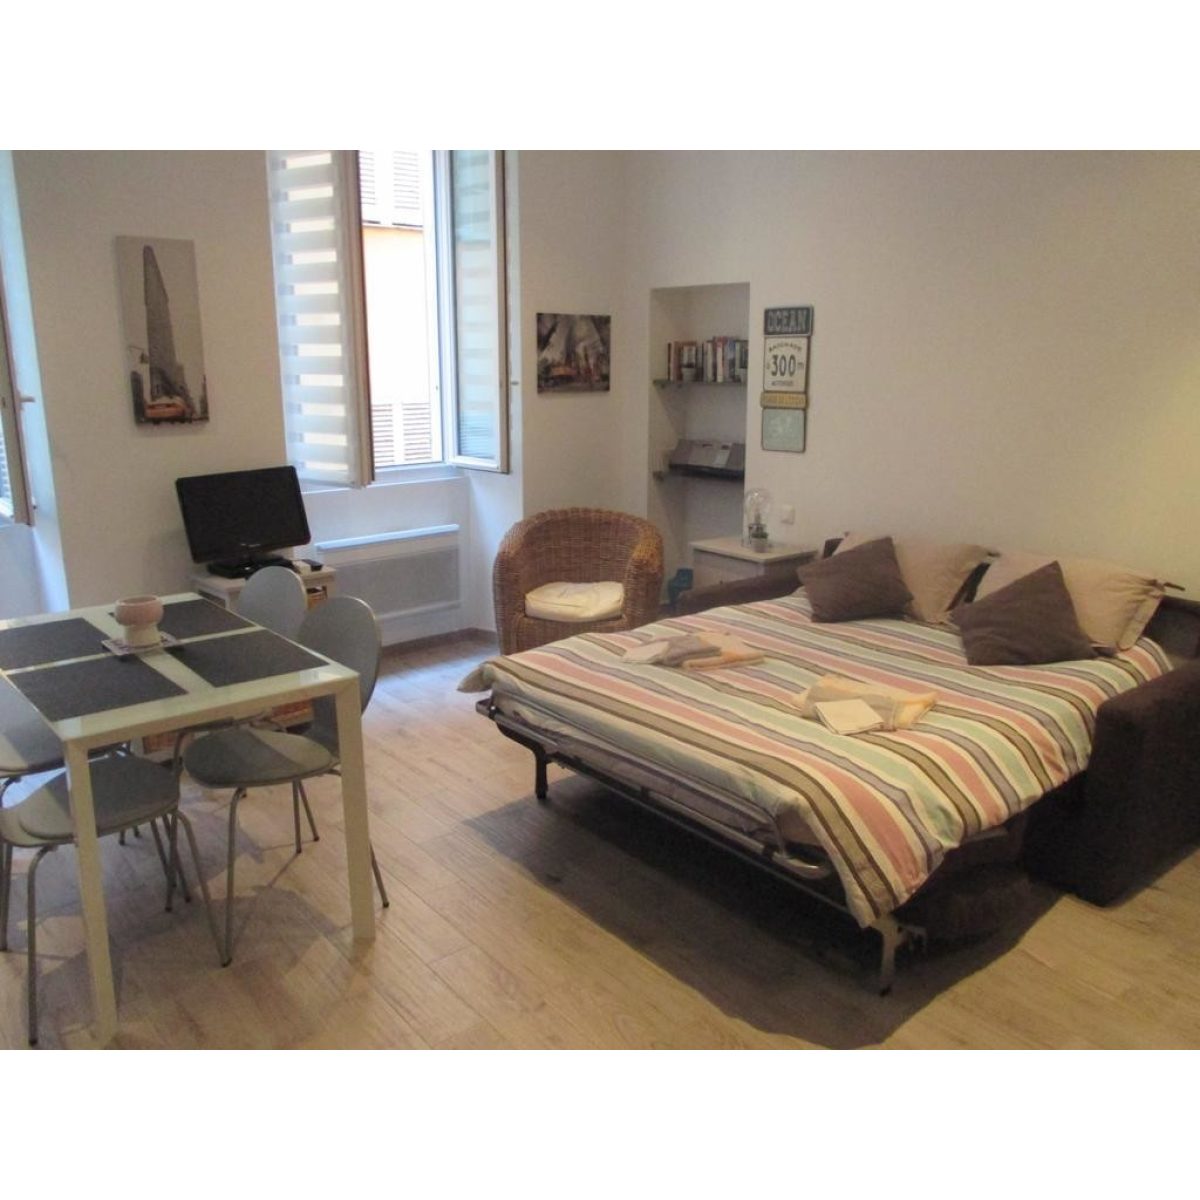 Dazzling 2 bedroom apartment in Zagreb for rent (Students only) | Zagreb apartment for rent 6